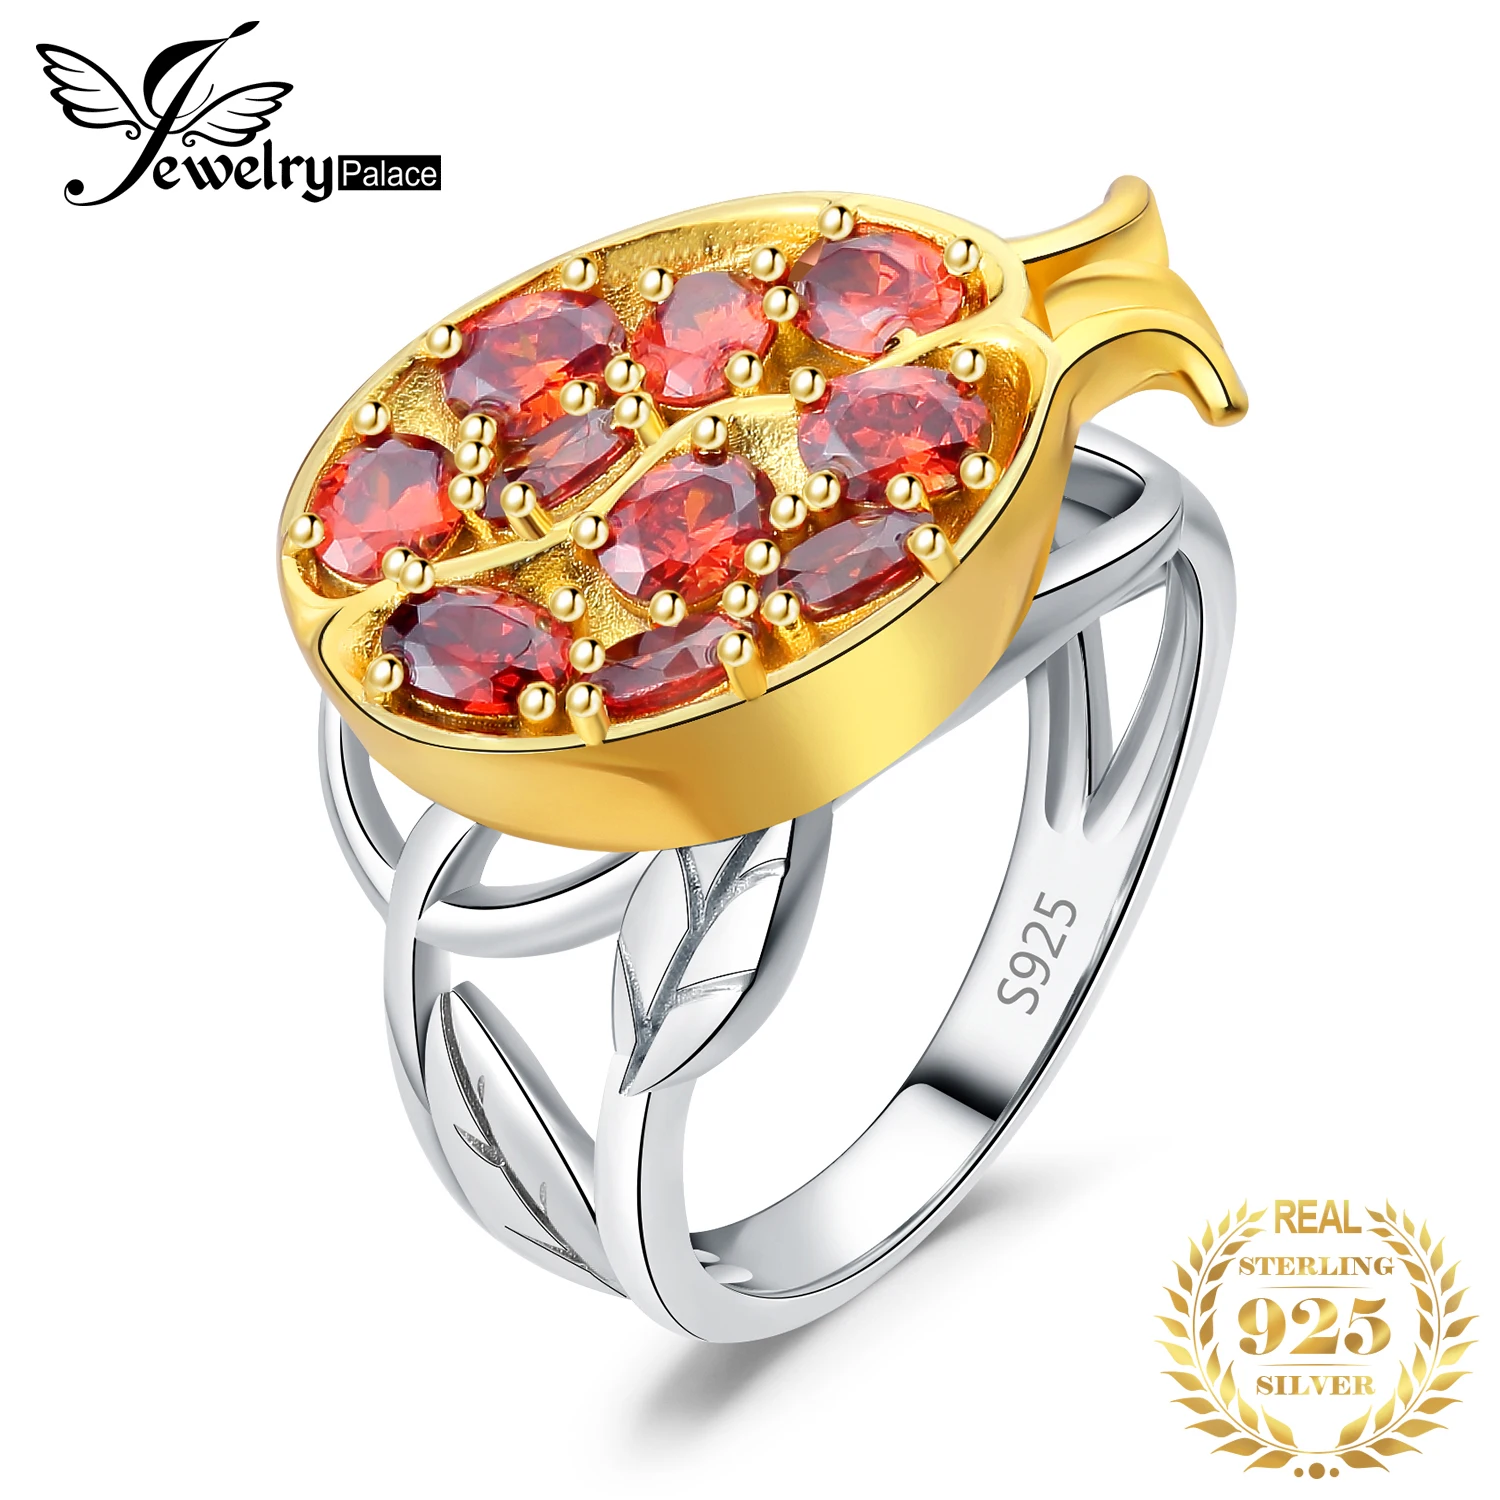 

JewelryPalace New Arrival Pomegranate Leaf Red Gemstone 925 Sterling Silver Cocktail Ring for Woman Fashion Yellow Gold Plated